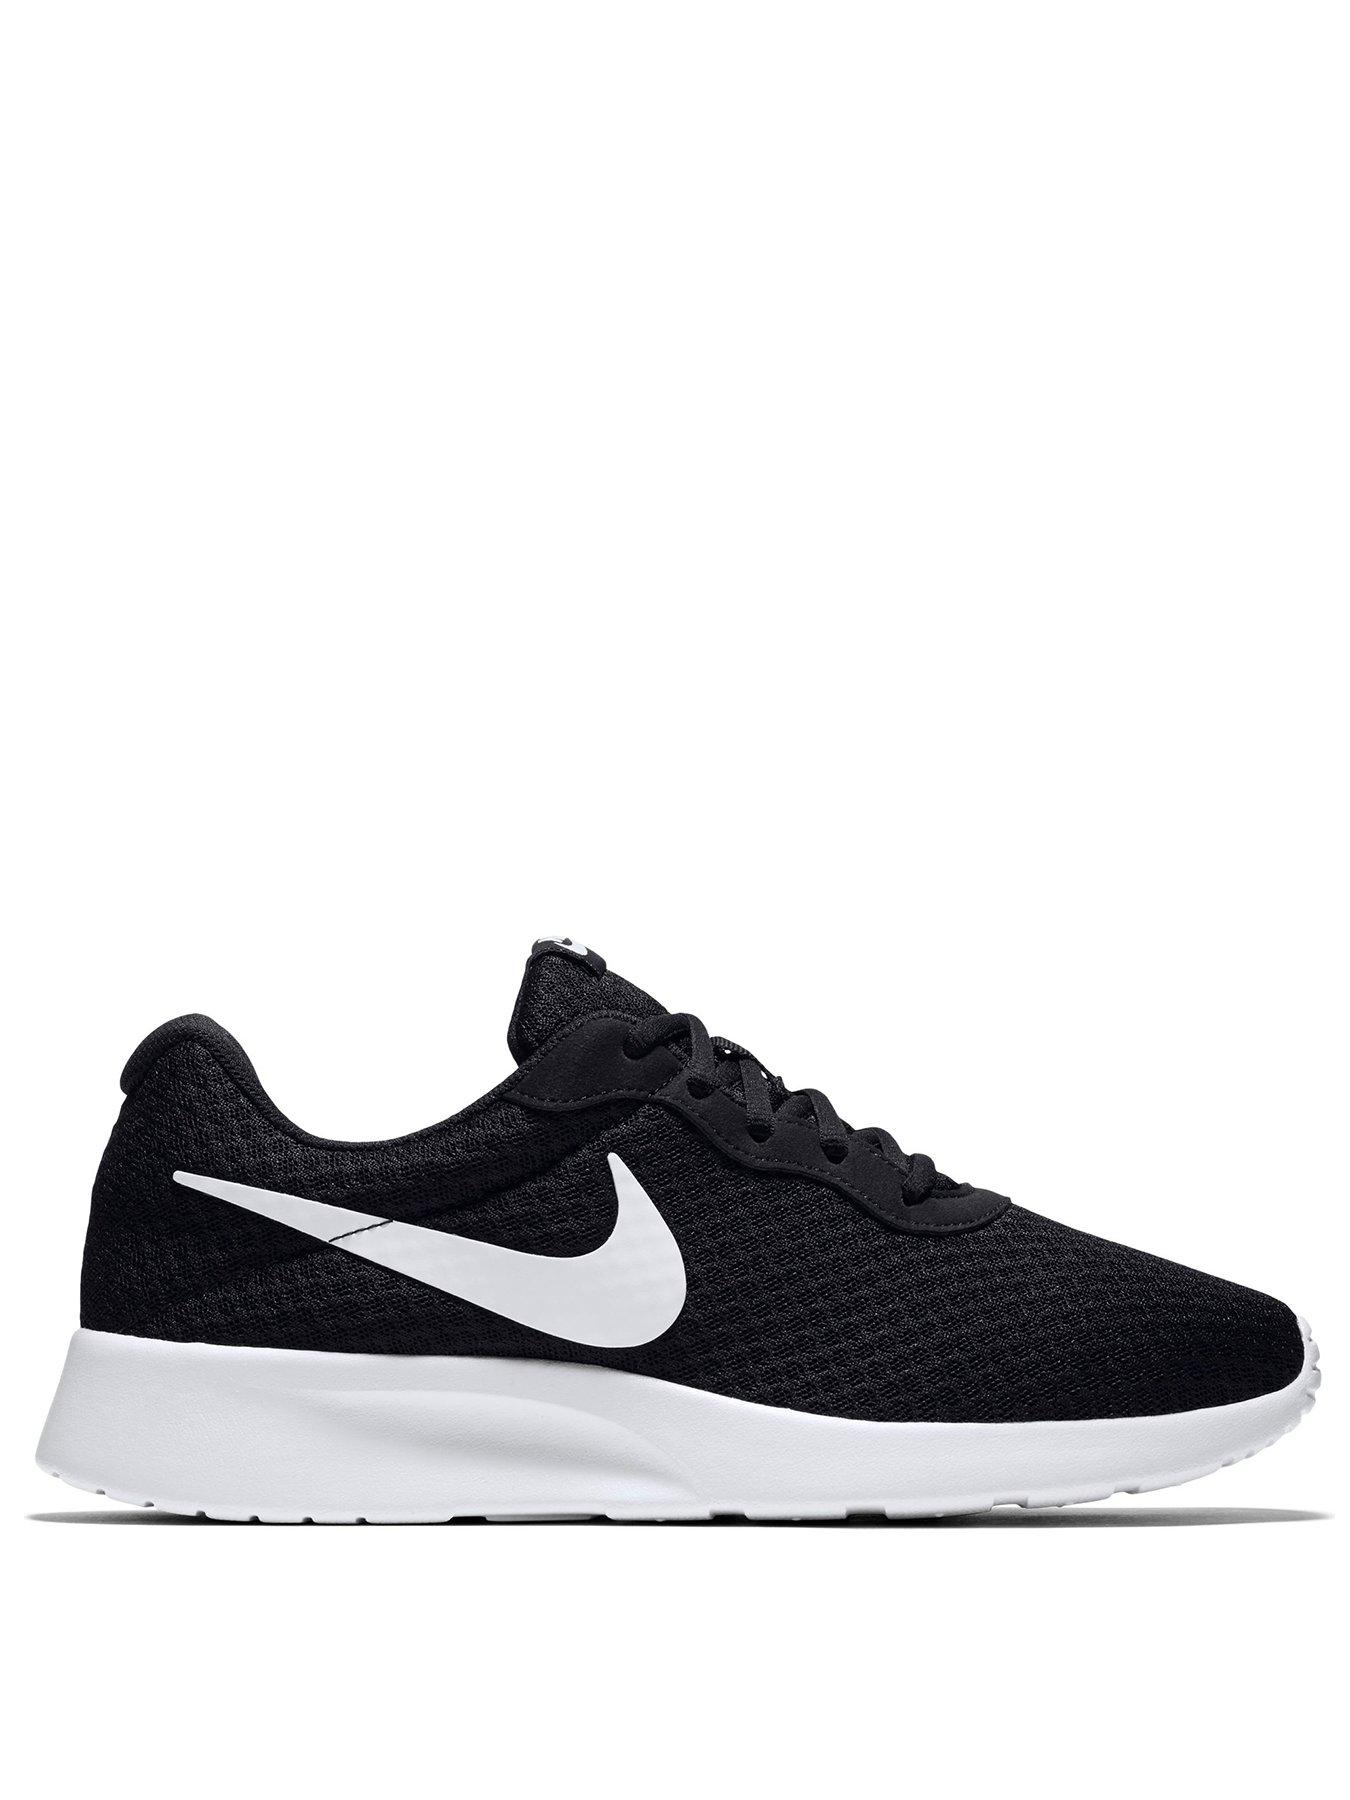 littlewoods mens trainers nike 27d71a